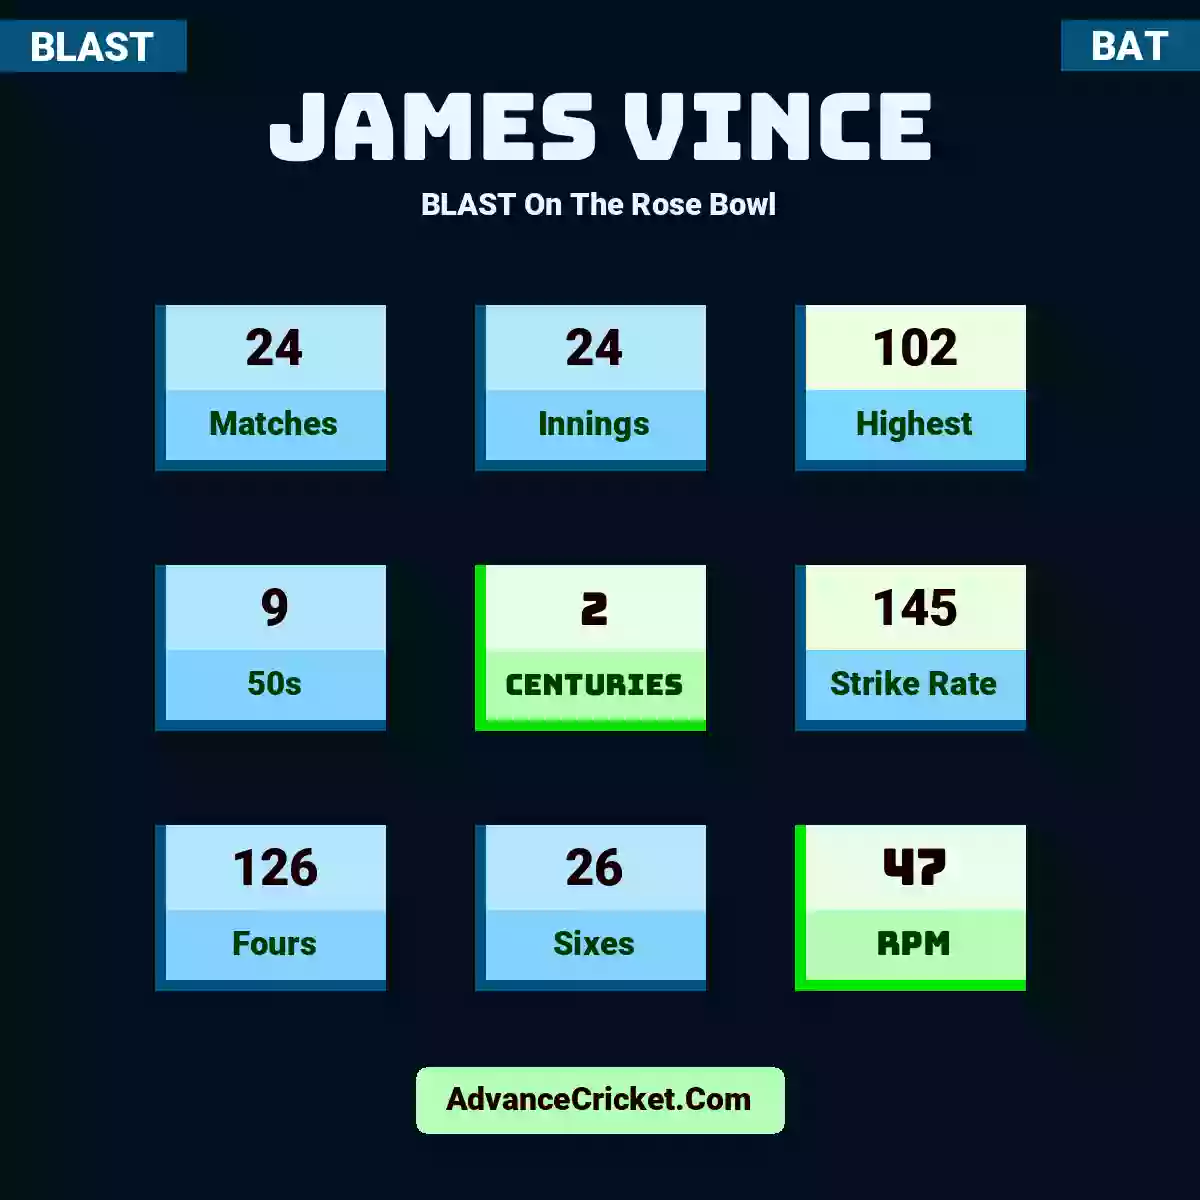 James Vince BLAST  On The Rose Bowl, James Vince played 24 matches, scored 102 runs as highest, 9 half-centuries, and 2 centuries, with a strike rate of 145. J.Vince hit 126 fours and 26 sixes, with an RPM of 47.